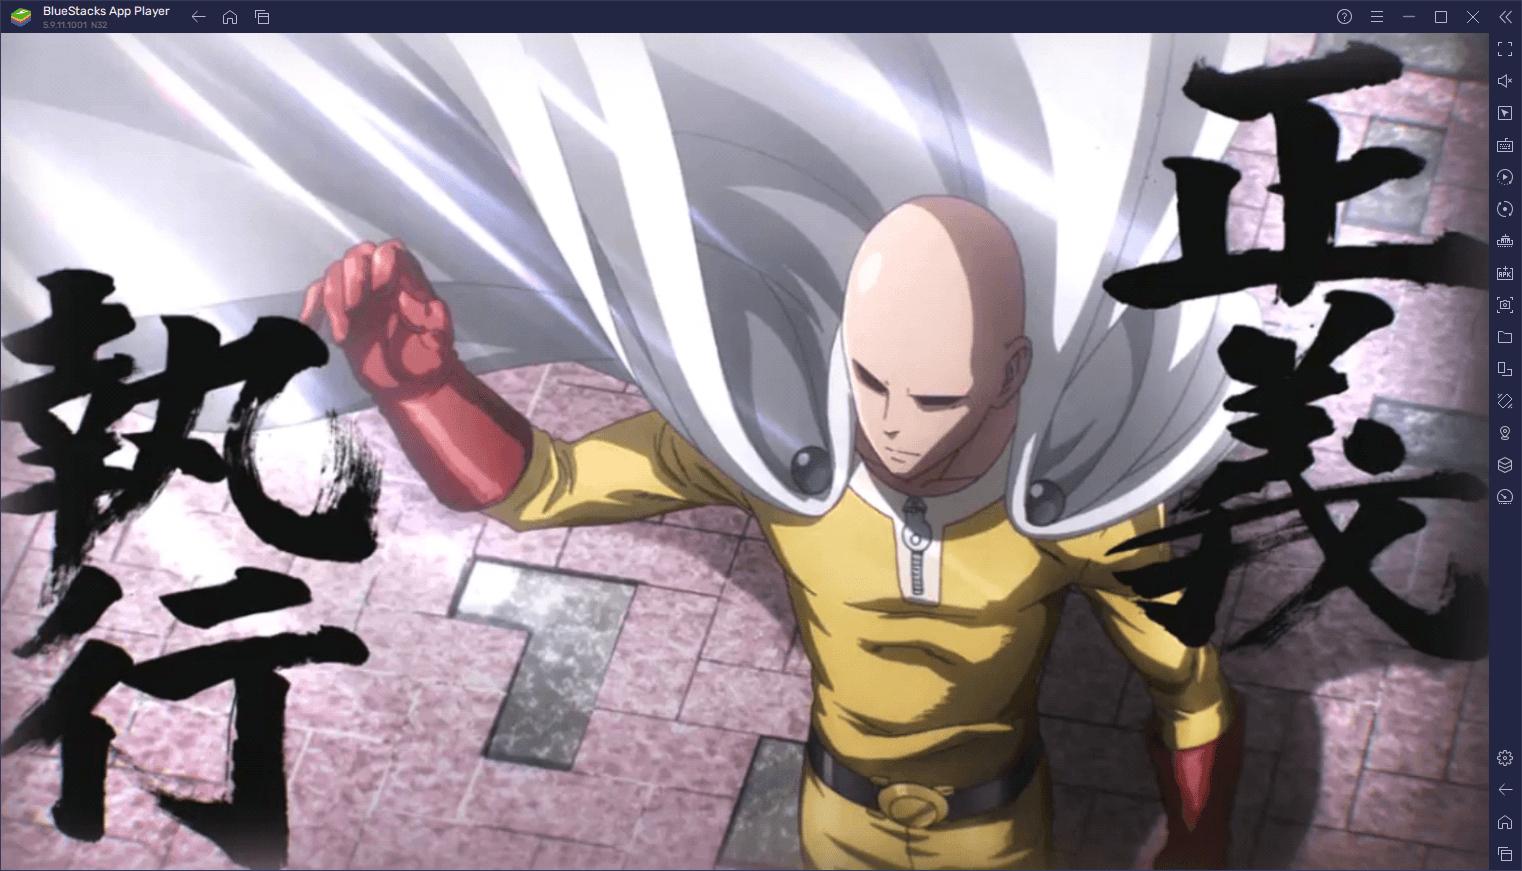 How to Play One Punch Man - The Strongest on PC with BlueStacks